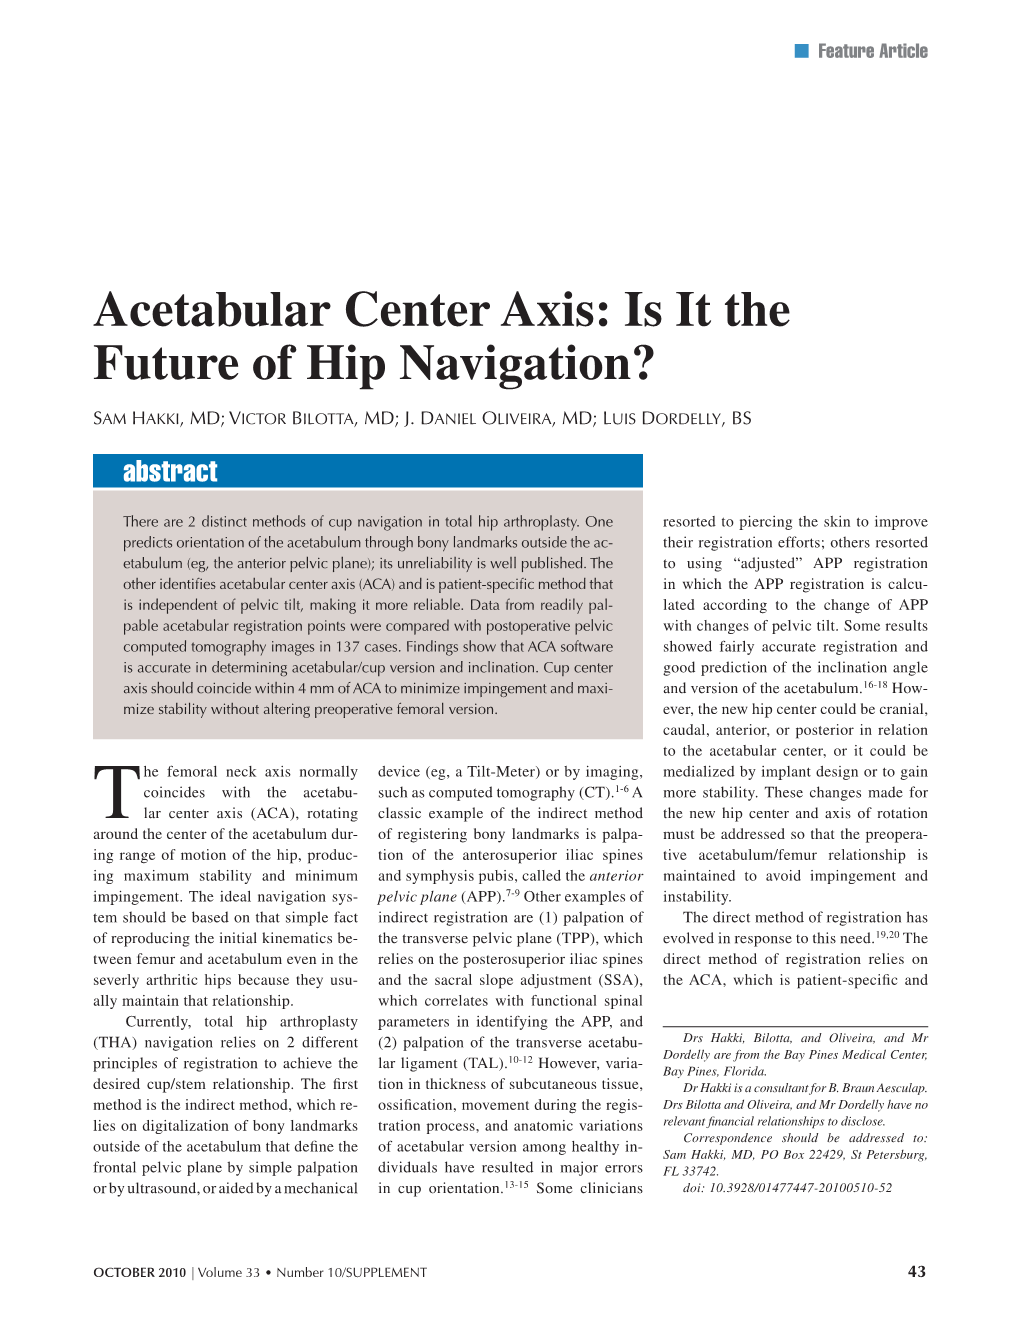 Acetabular Center Axis: Is It the Future of Hip Navigation?